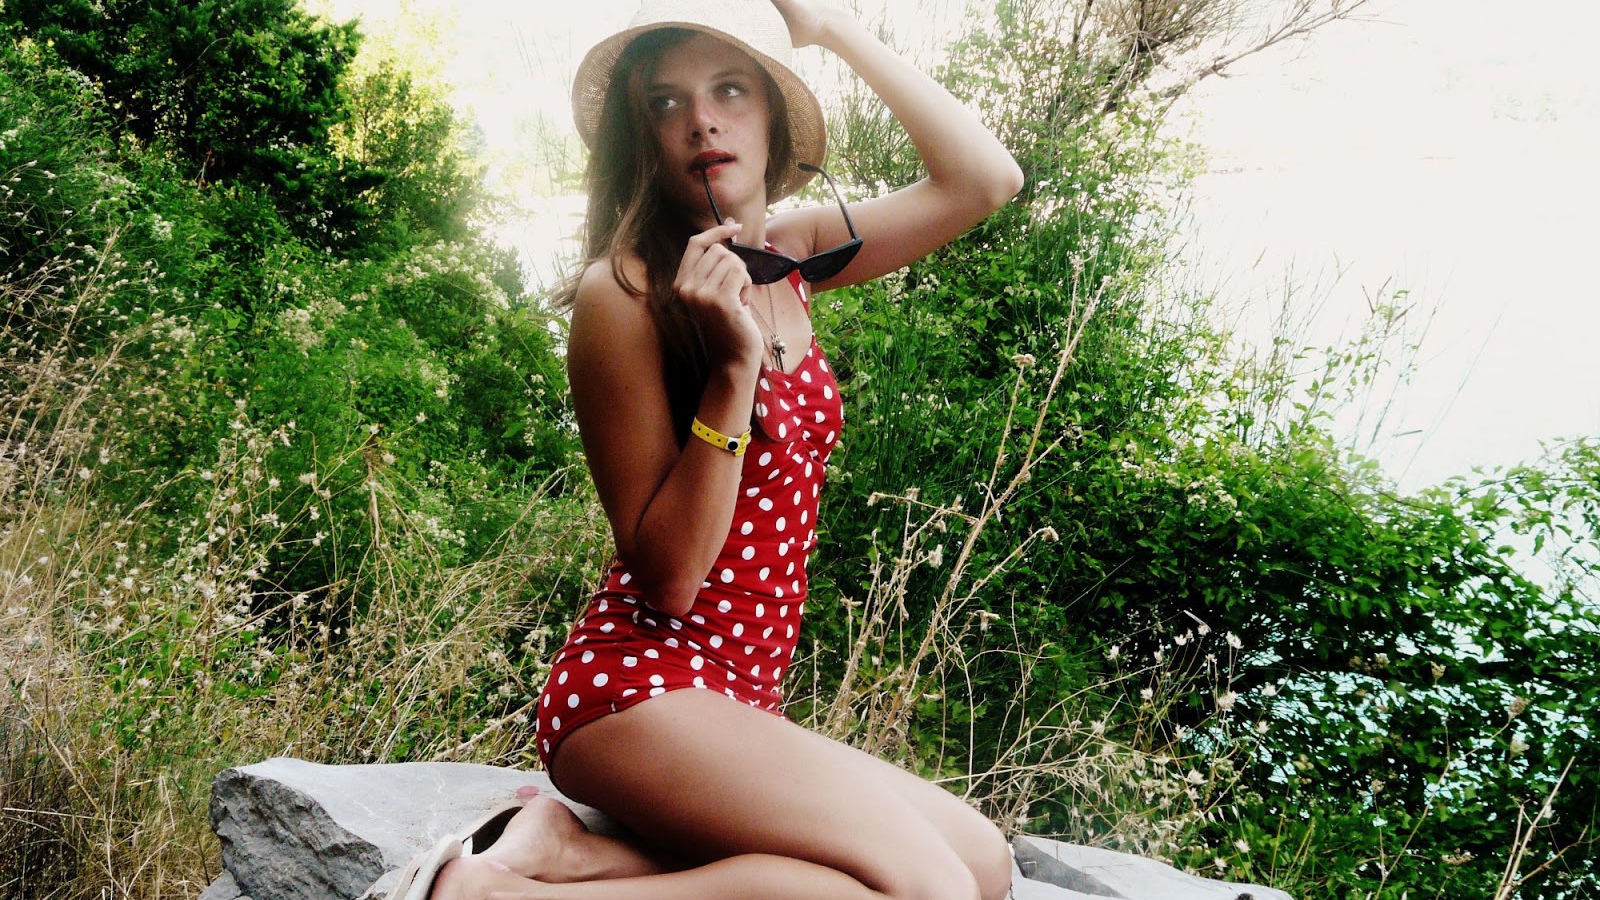 Girl in bathing suit with polka dots